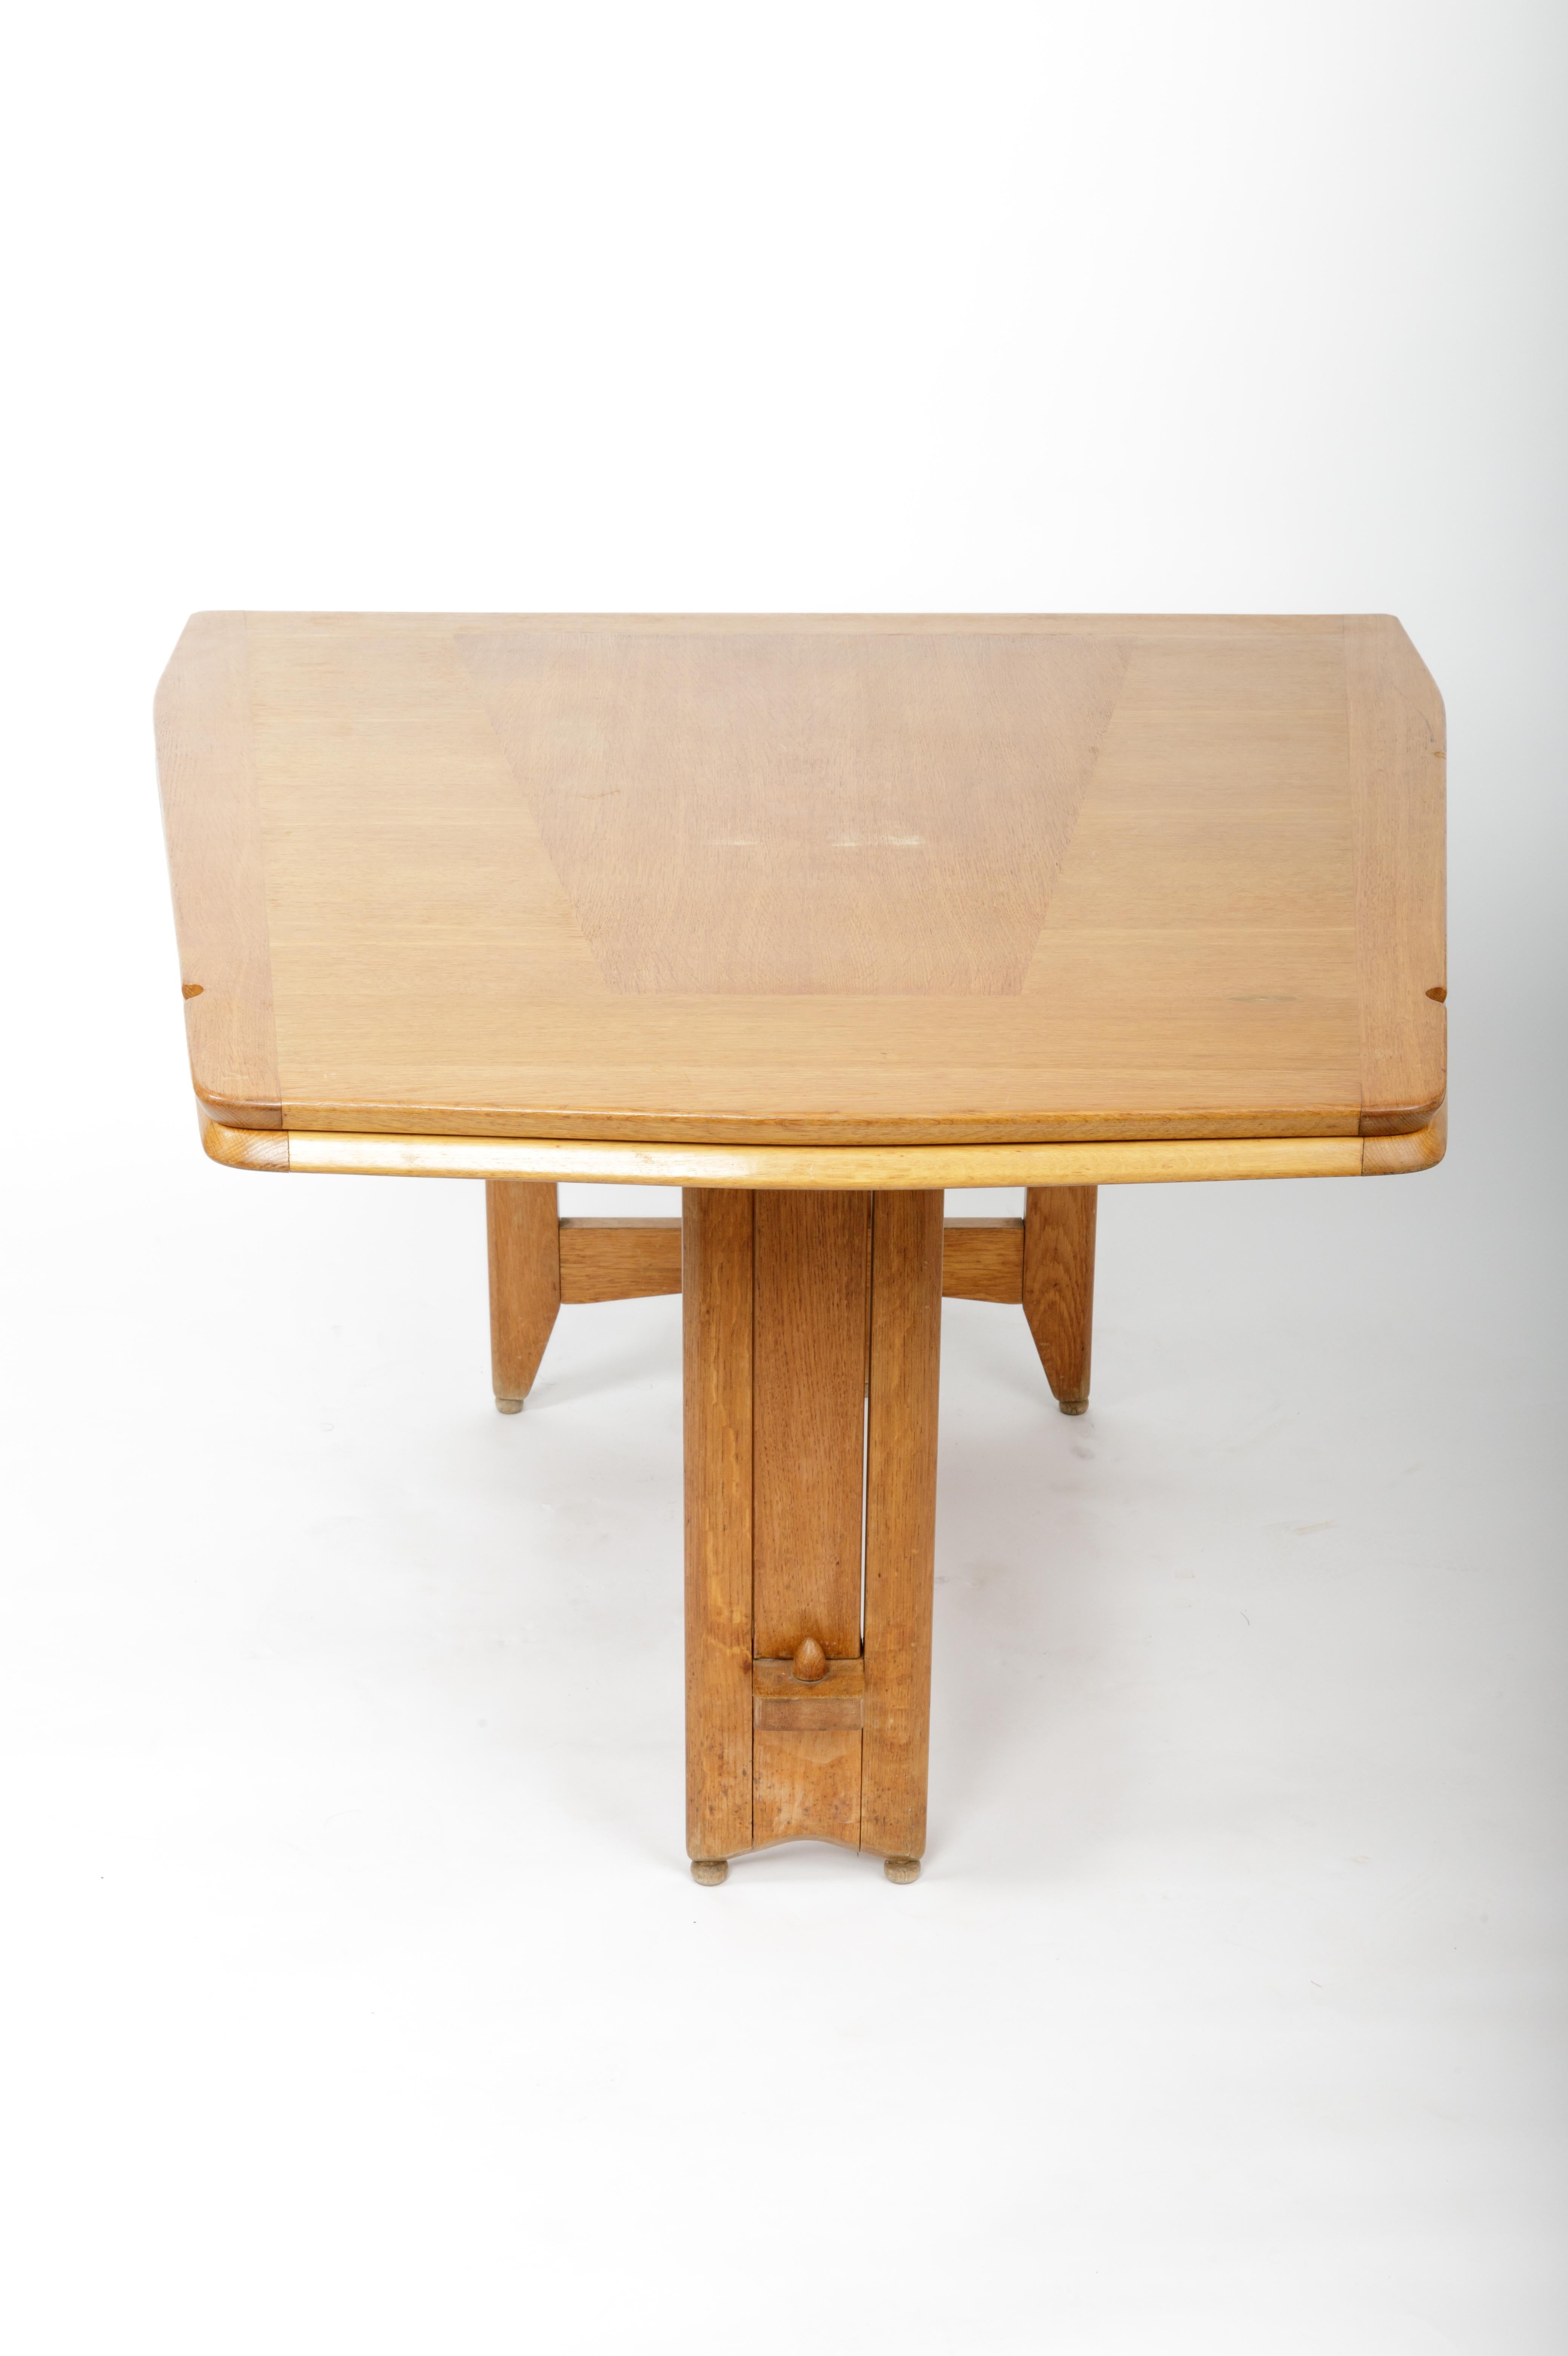 French Guillerme et Chambron Folding Dining Table, France, c. 1970s